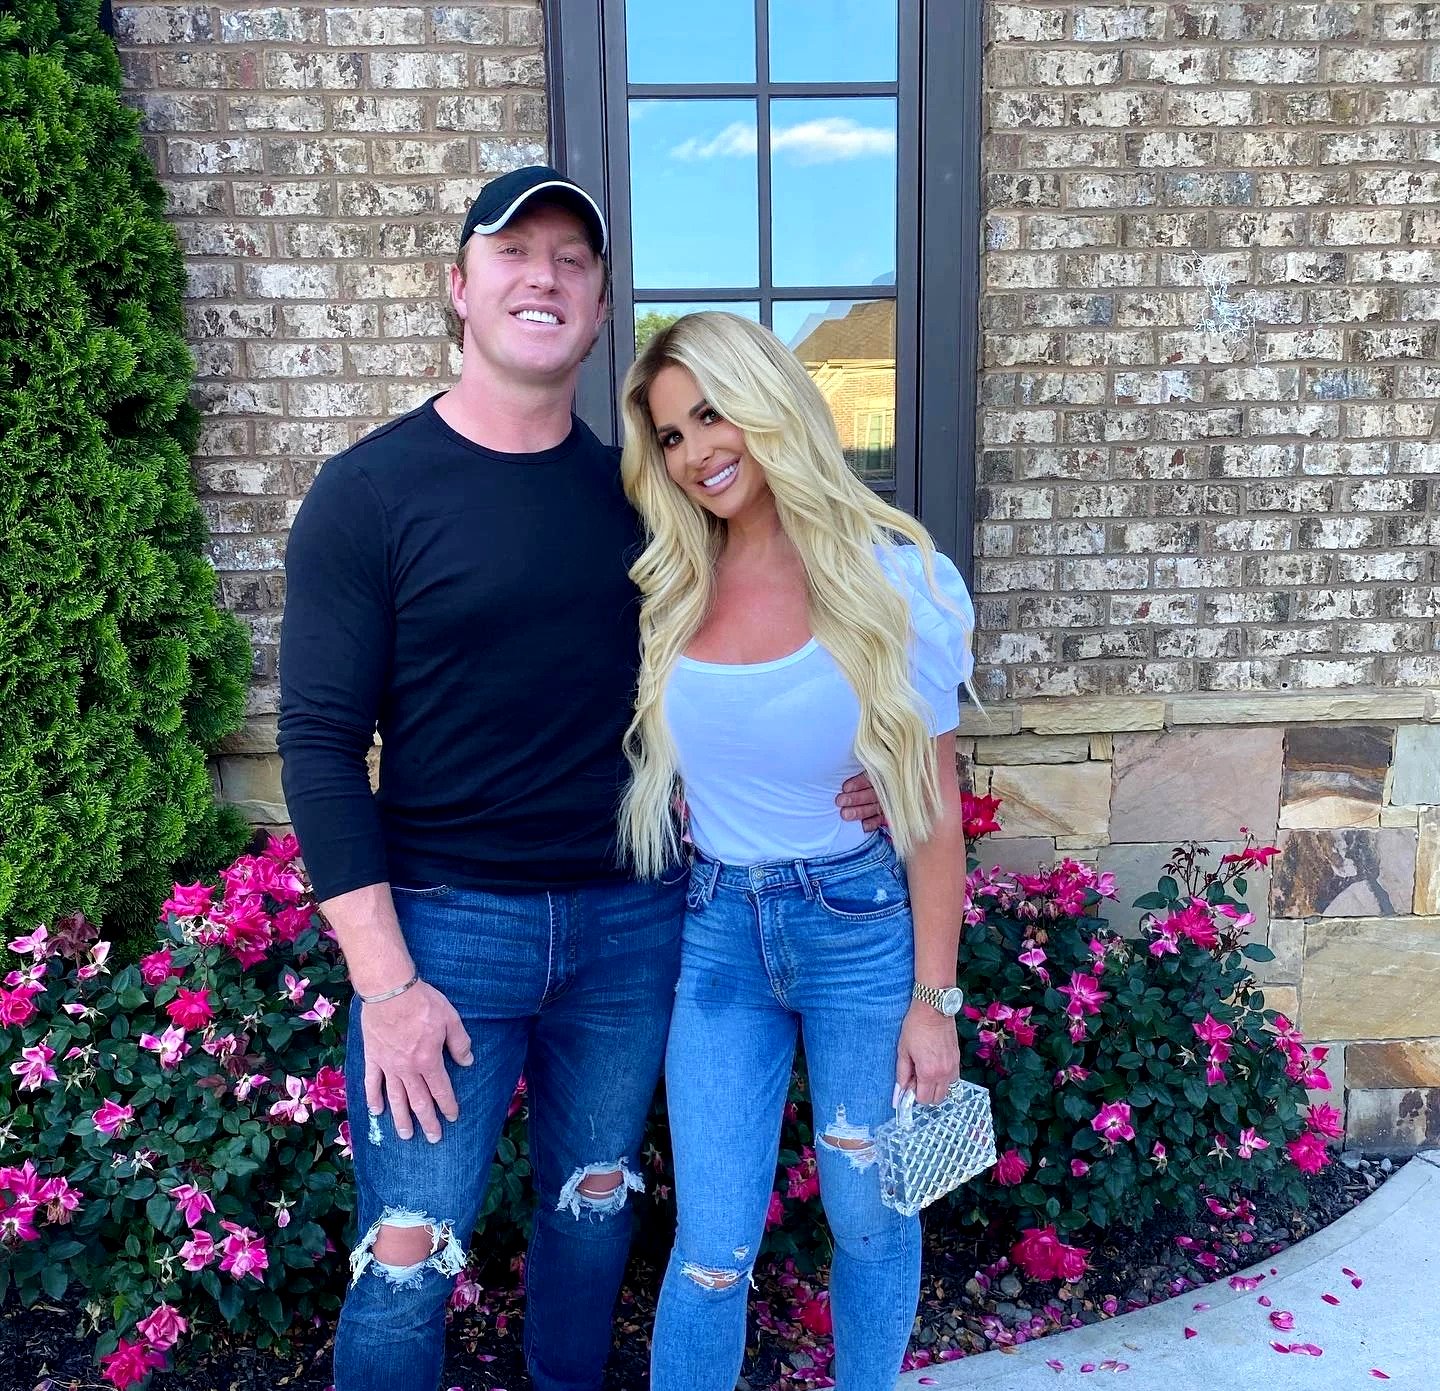 Judge Scolds Kim Zolciak for Skipping Divorce Hearing as Kroy Biermann Confirms Foreclosure, Plus Kim Returns Home After Filming Surreal Life in Colombia, See Her Post